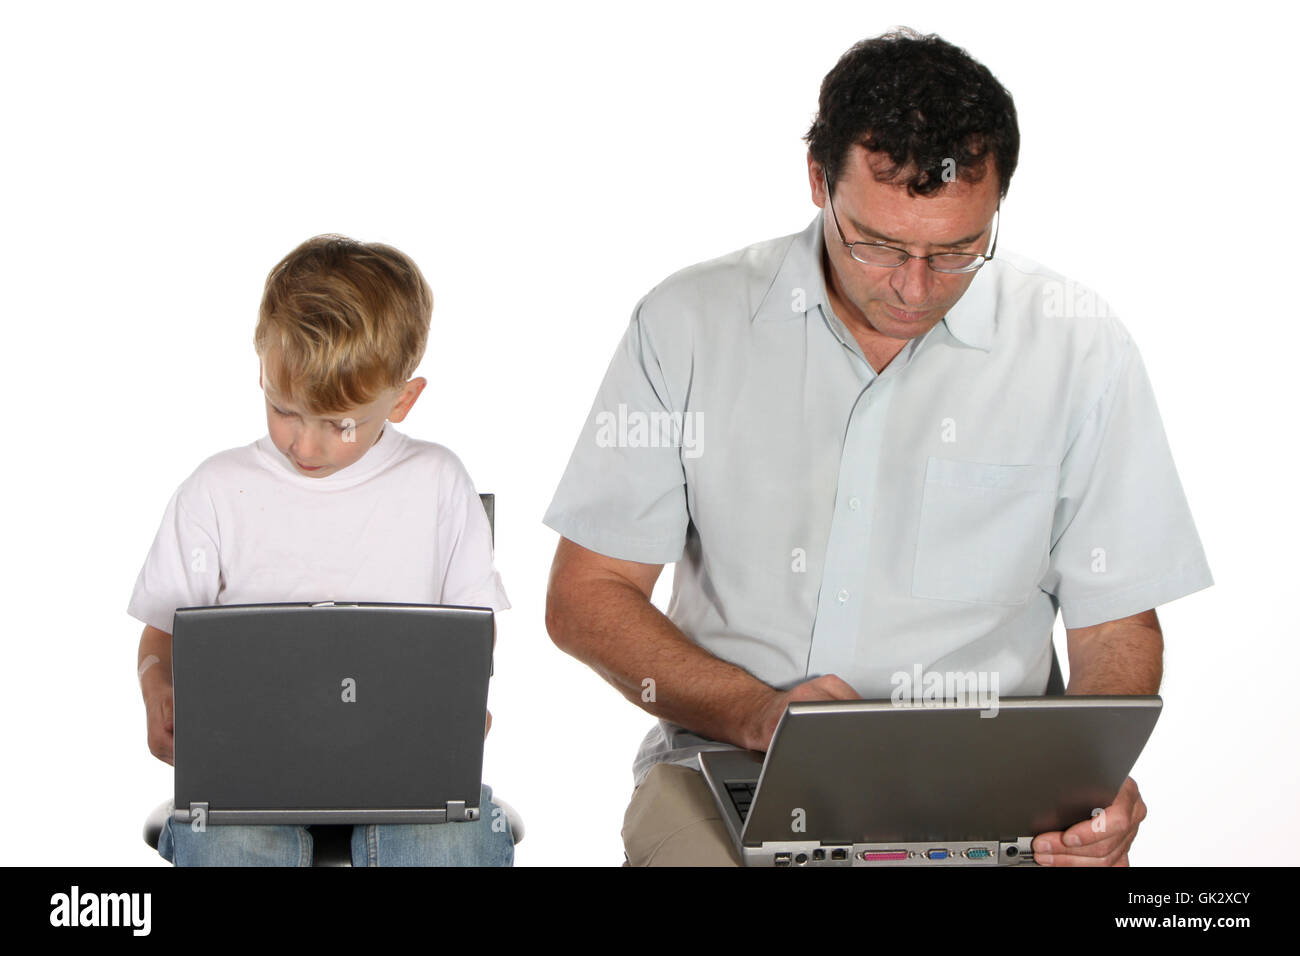 son adult adults Stock Photo